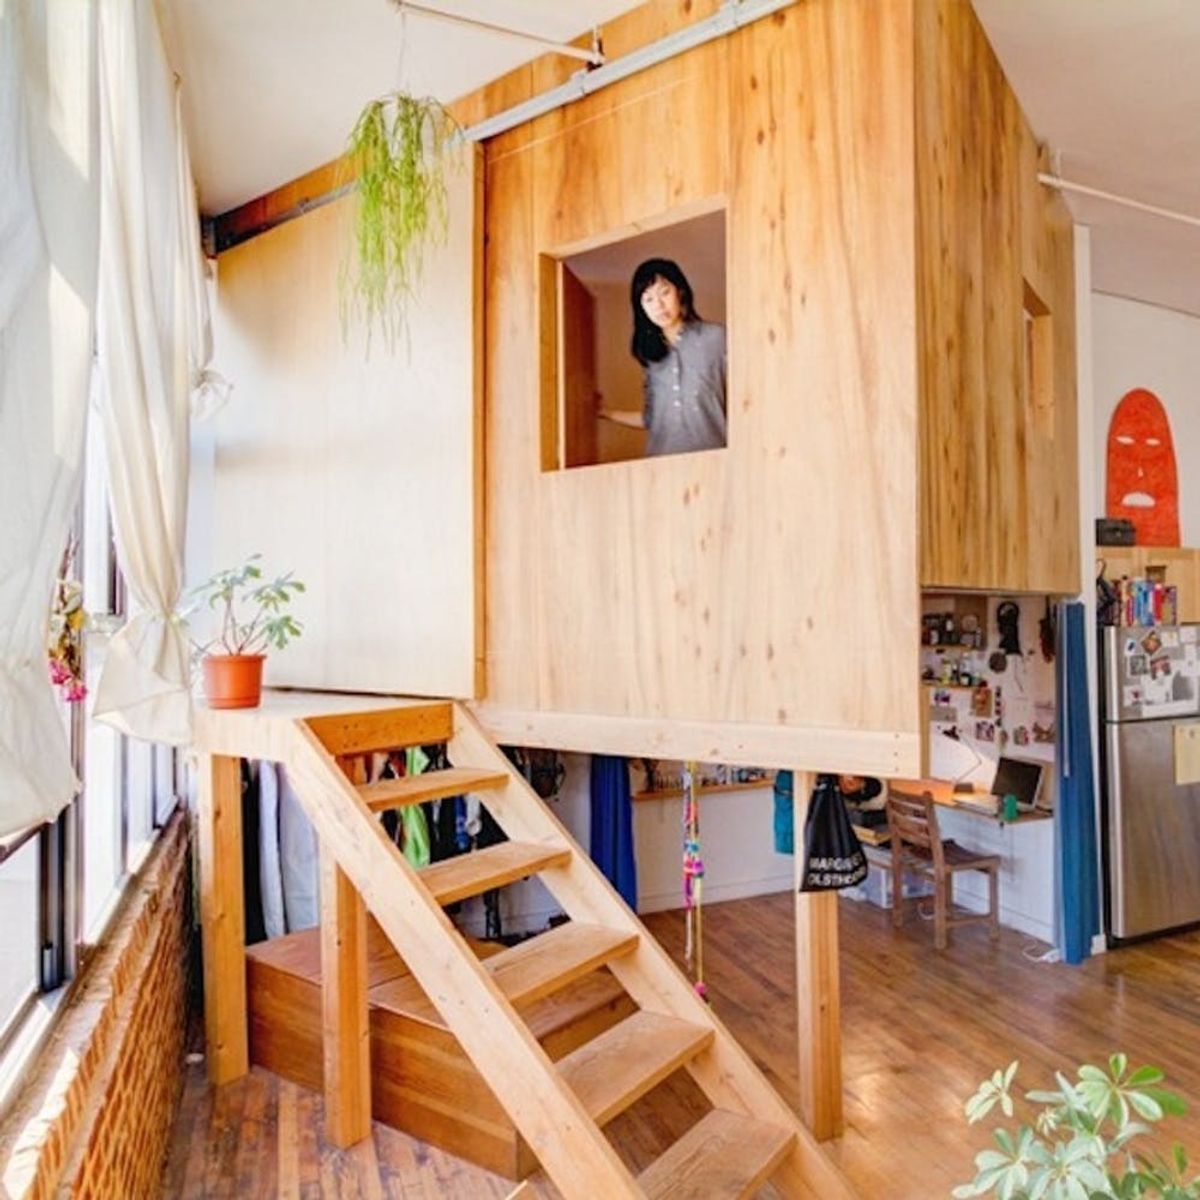 You Have to See This Treehouse Built Inside a Studio Apartment!